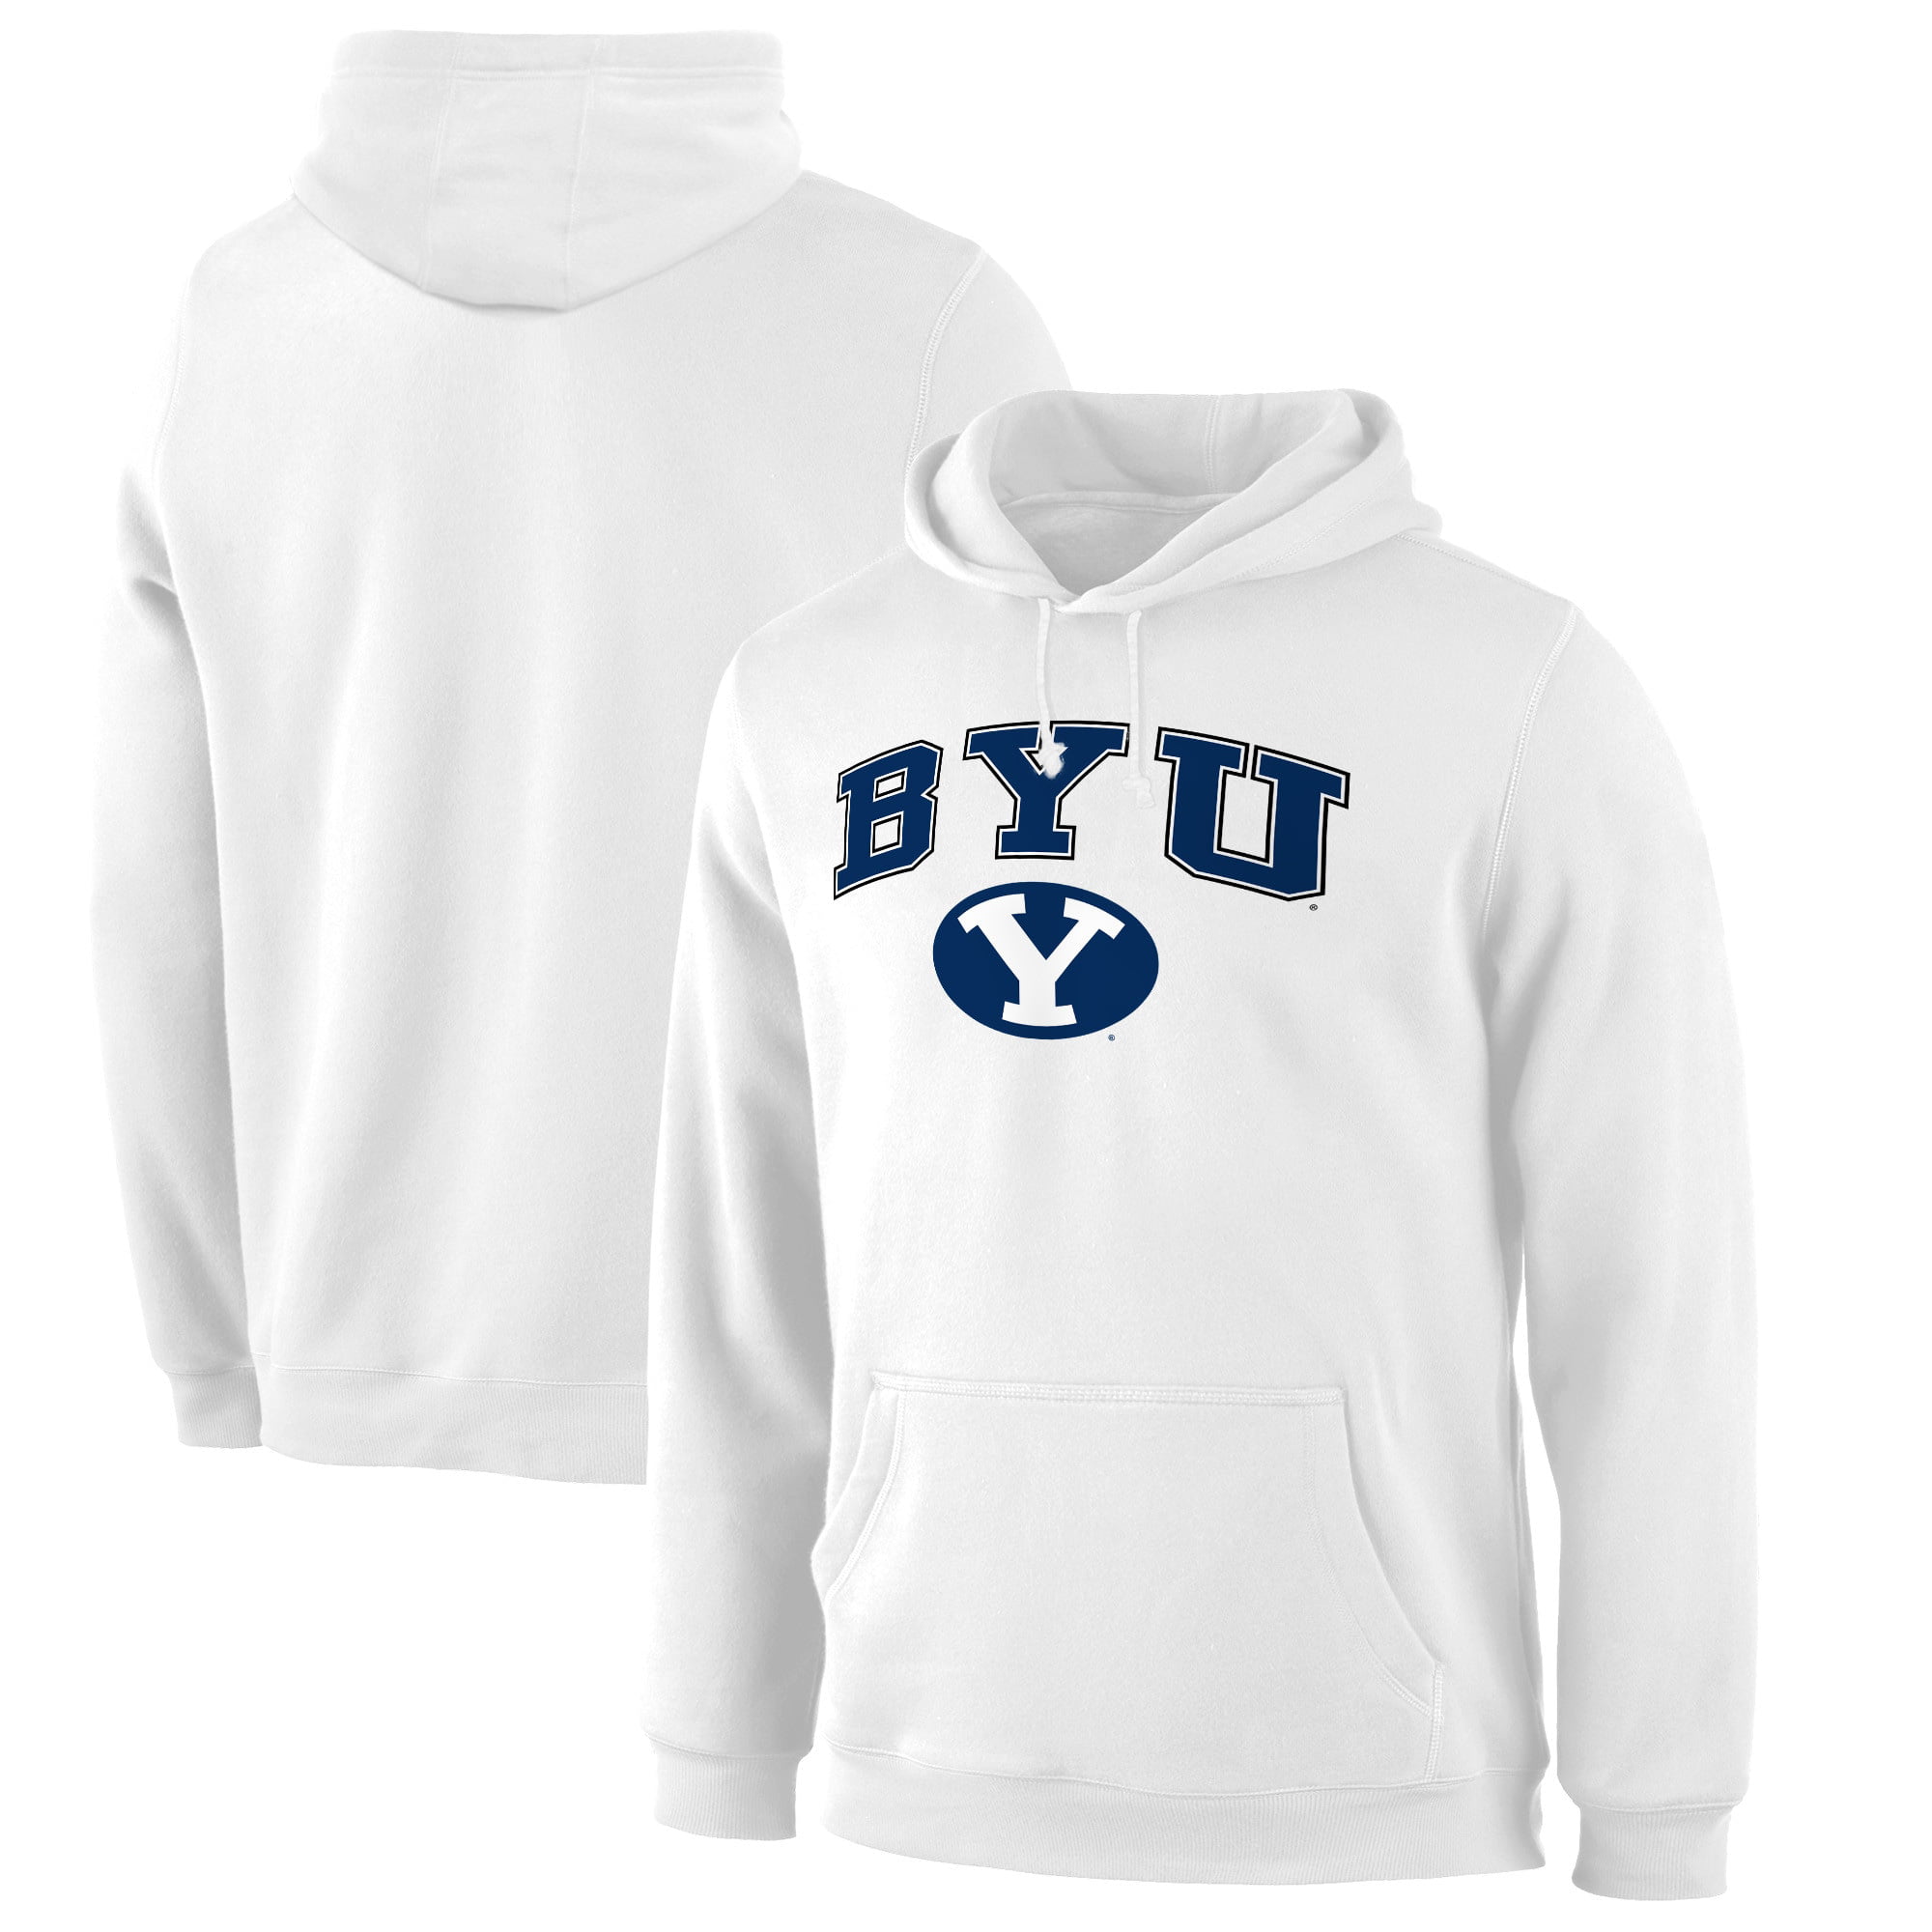 BYU COUGARS WHITE ADULT EMBROIDERED HOODED SWEATSHIRT NEW 